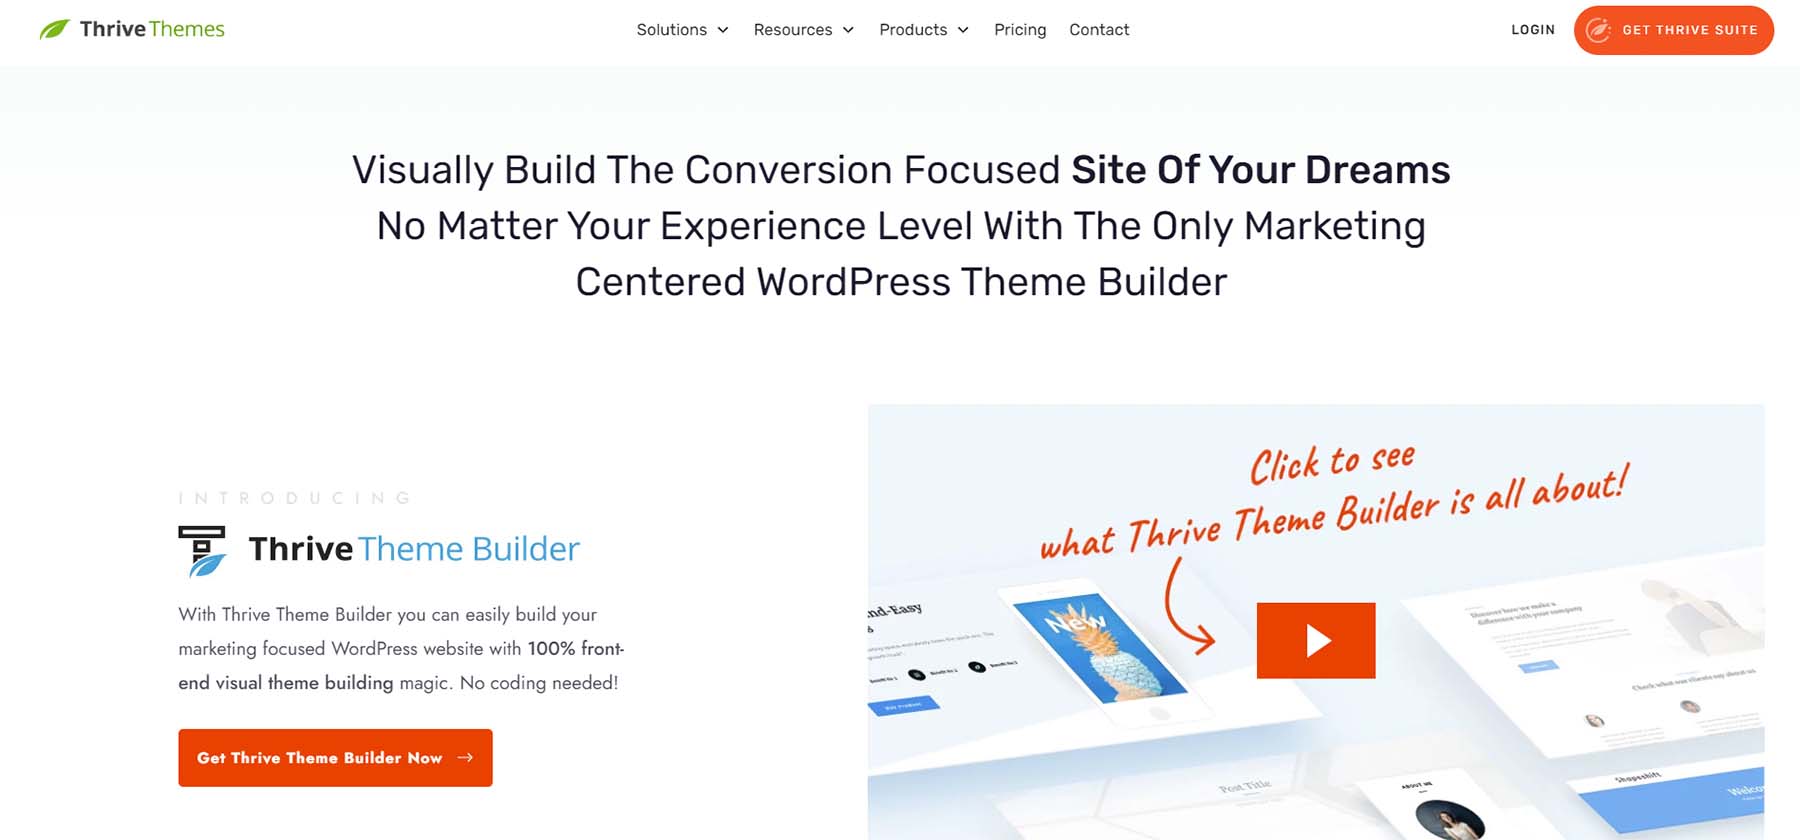 Thrive Theme Builder, for building marketing focused WordPress websites from scratch!